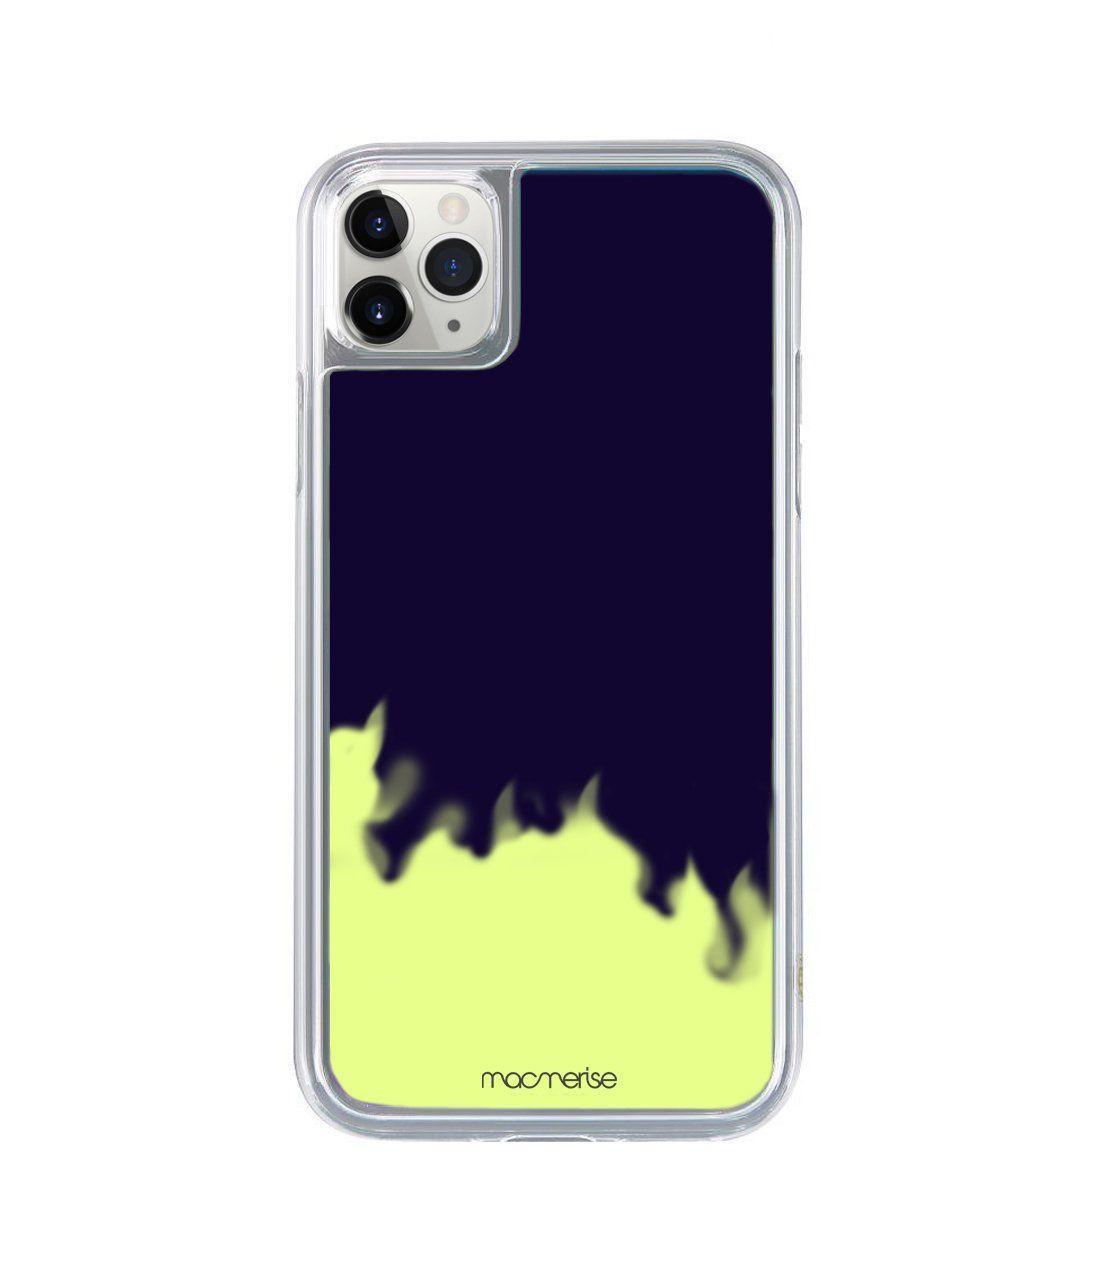 Neon Sand Blue - Neon Sand Phone Case for iPhone 11 Pro Max